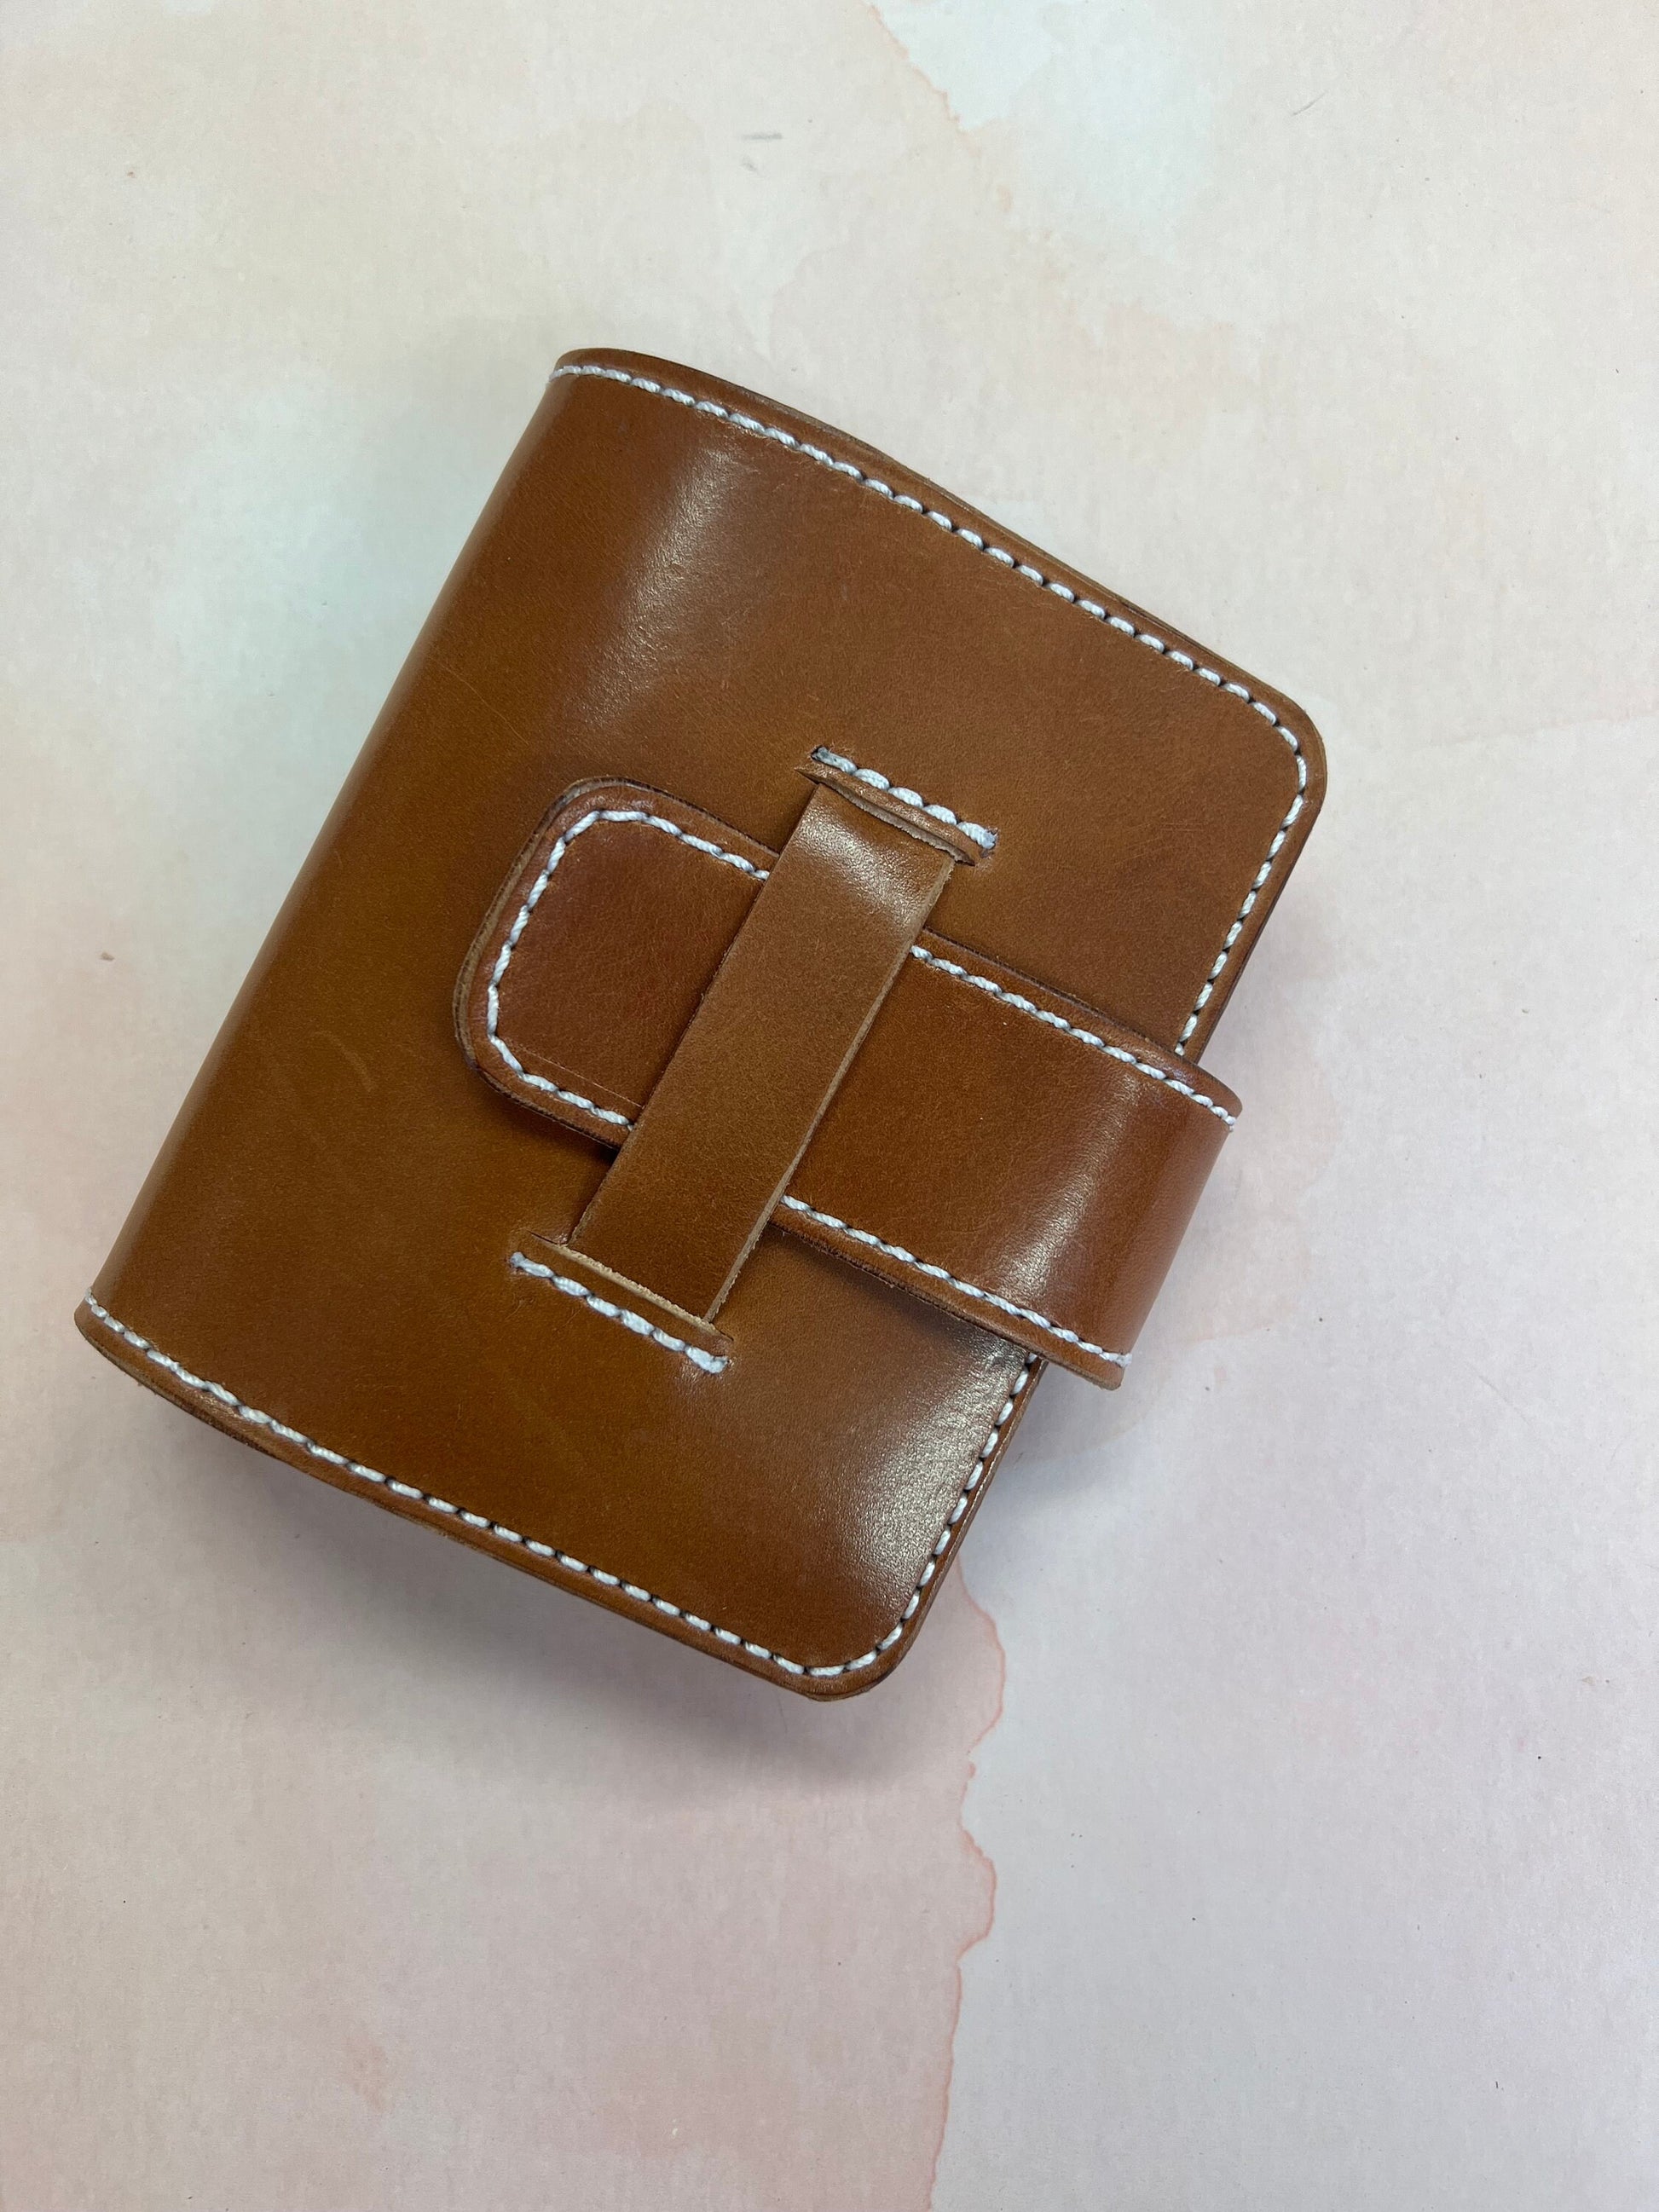 Custom Stitched Tab Closure, an upgrade to your TN order